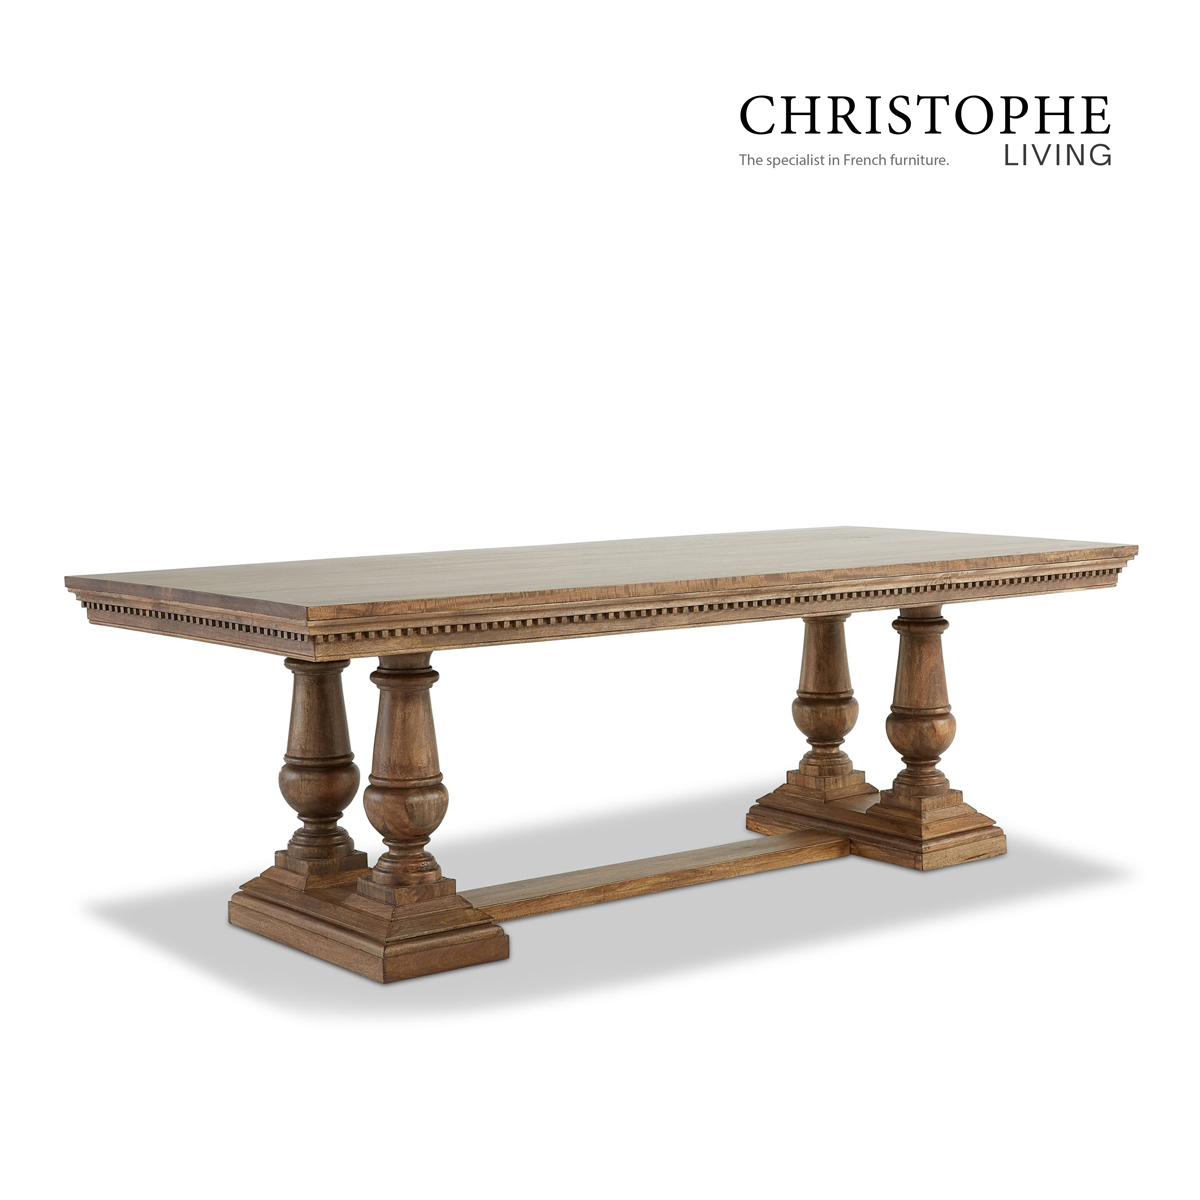 Valentino French Provincial Solid Timber Dining Table - Walnut Grey Stain, 10-Seater Rectangular Design